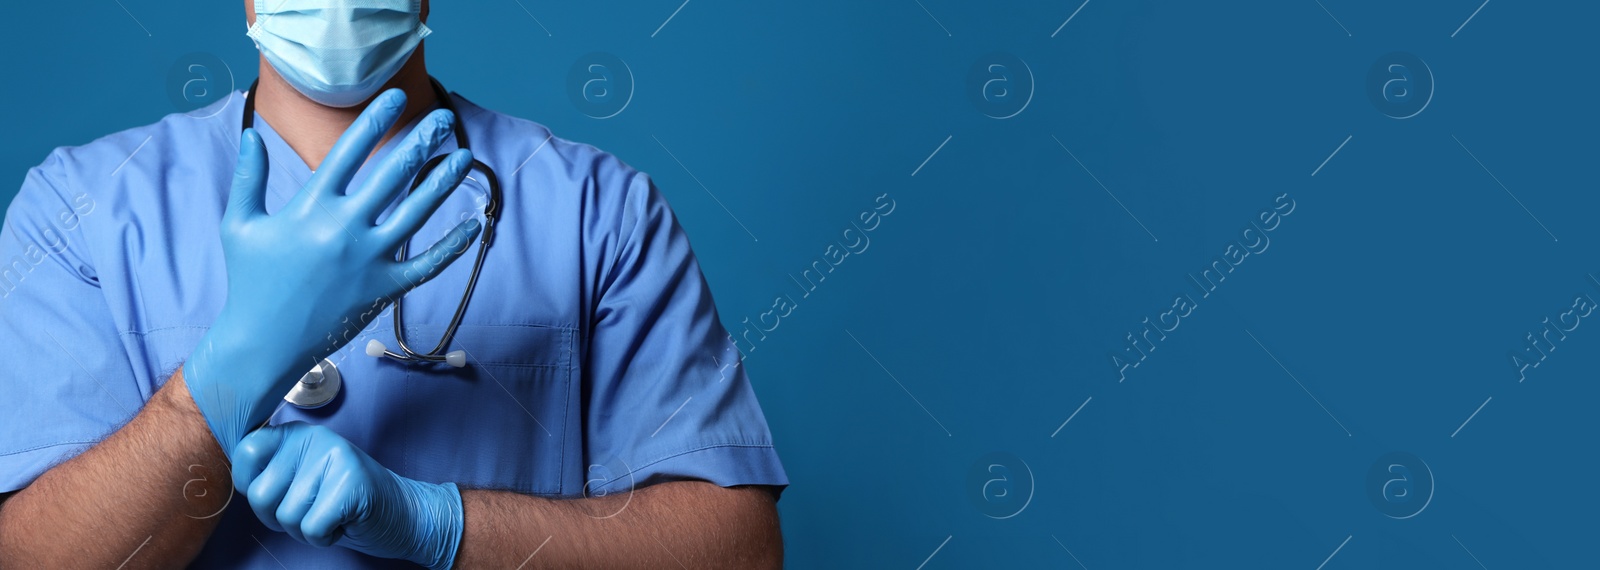 Image of Surgeon putting on medical gloves against blue background, closeup. Banner design with space for text